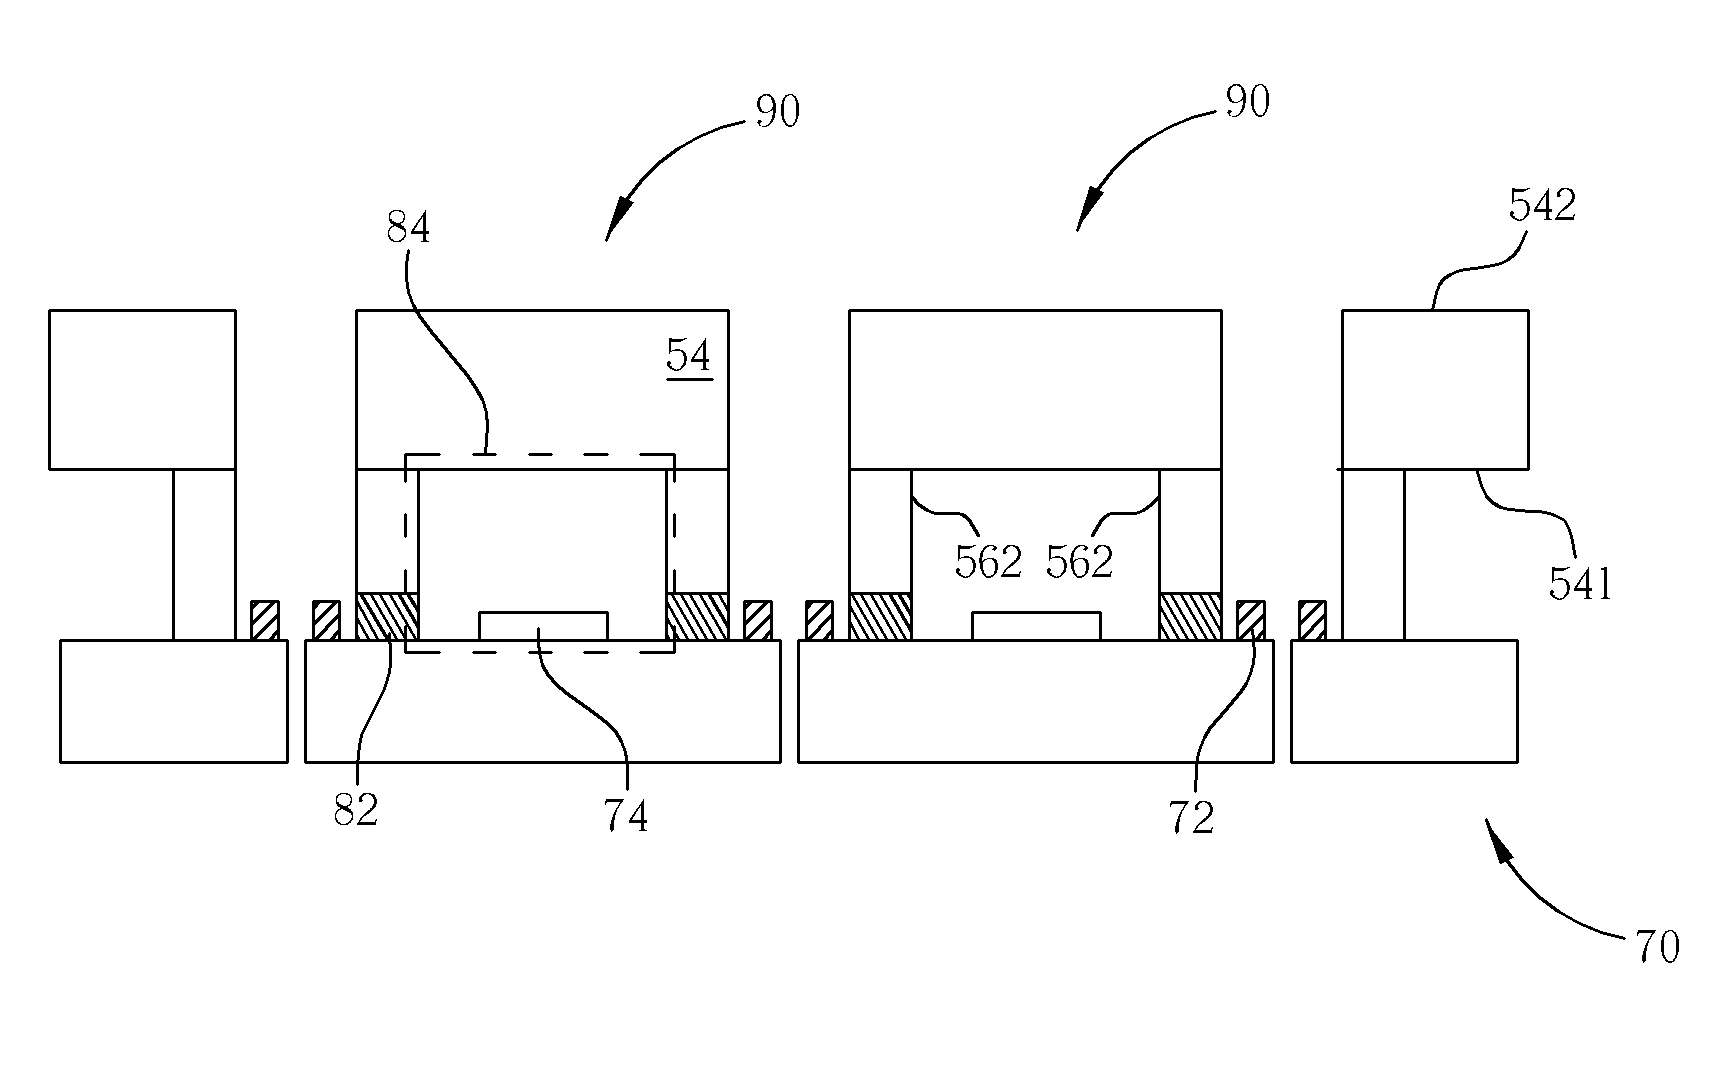 Method of wafer level packaging and cutting